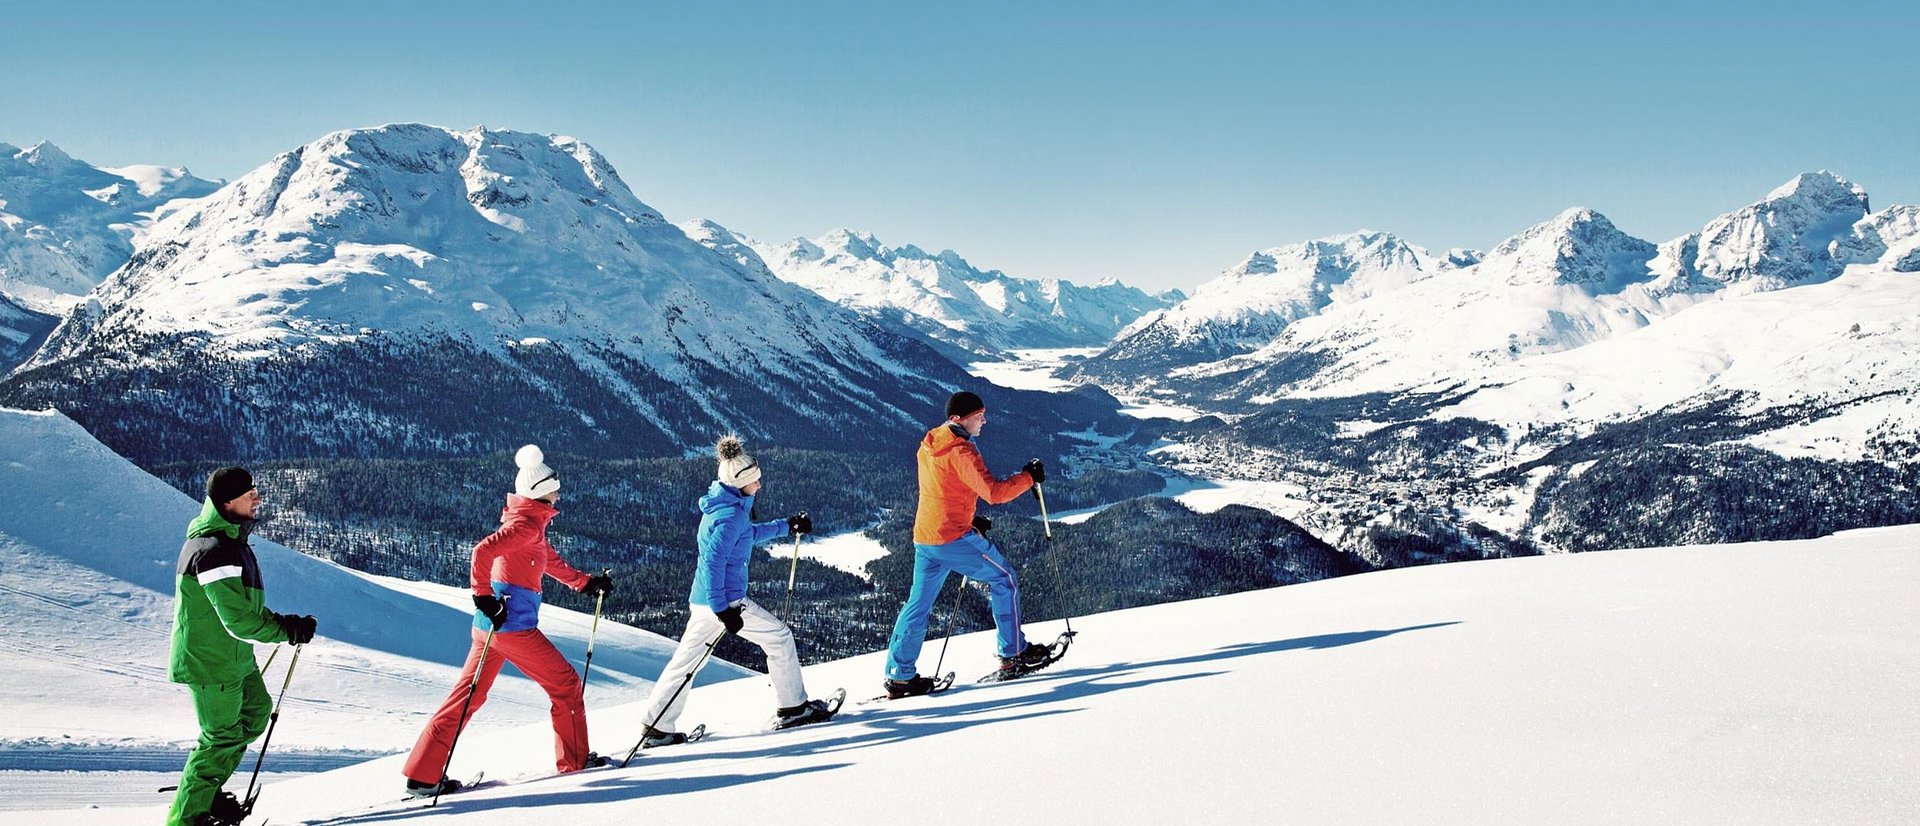 Book your best wintersport experience now at an unbeatable price